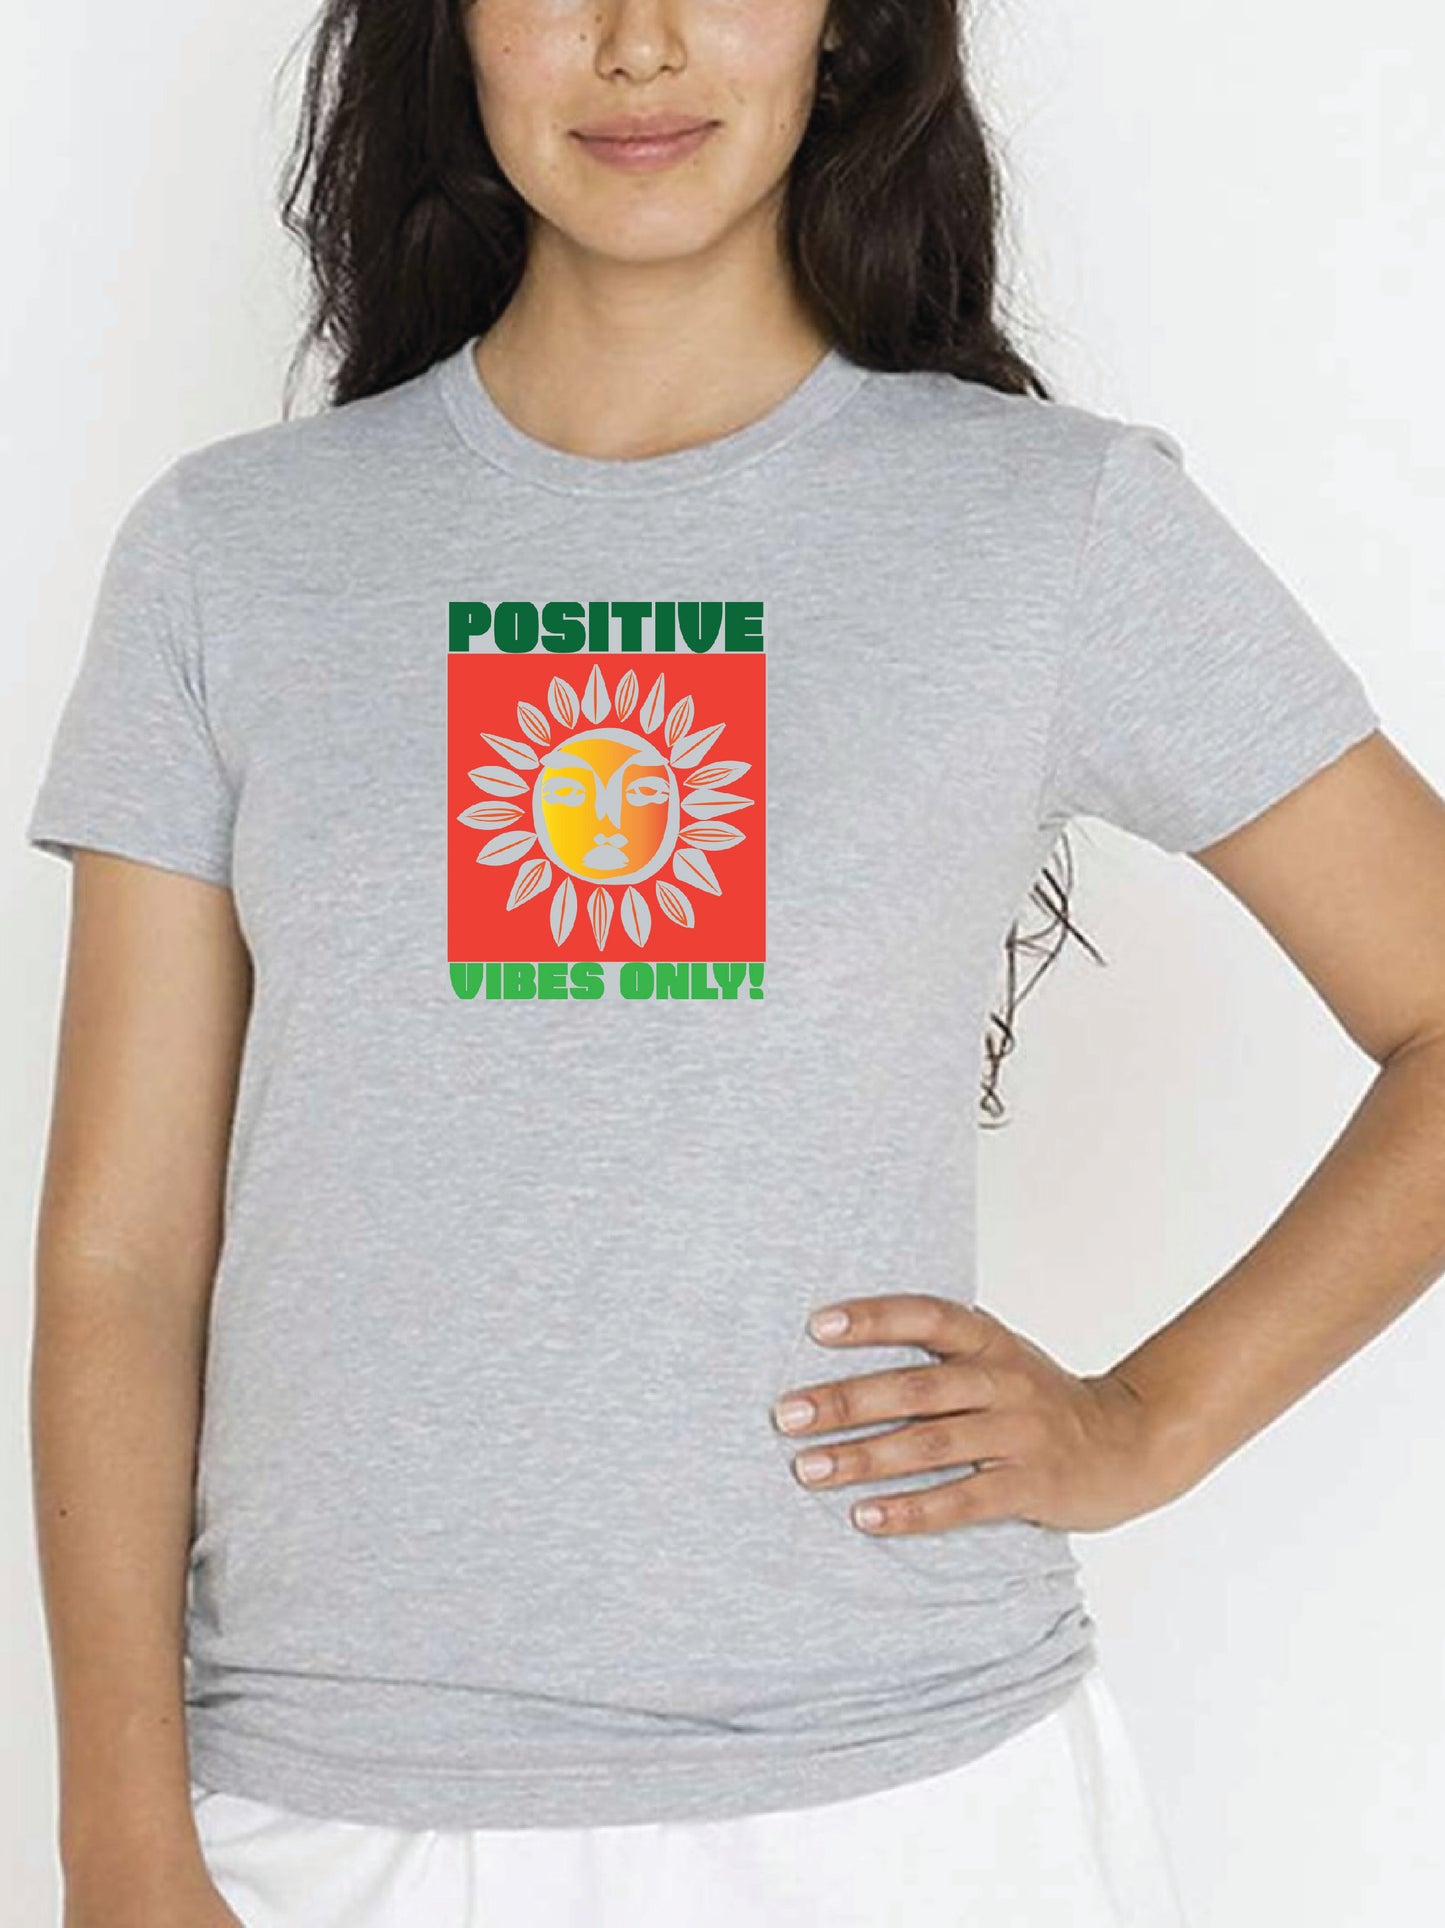 Grey Heather POSITIVE VIBES ONLY Women's Cotton Blend Graphic T-shirt